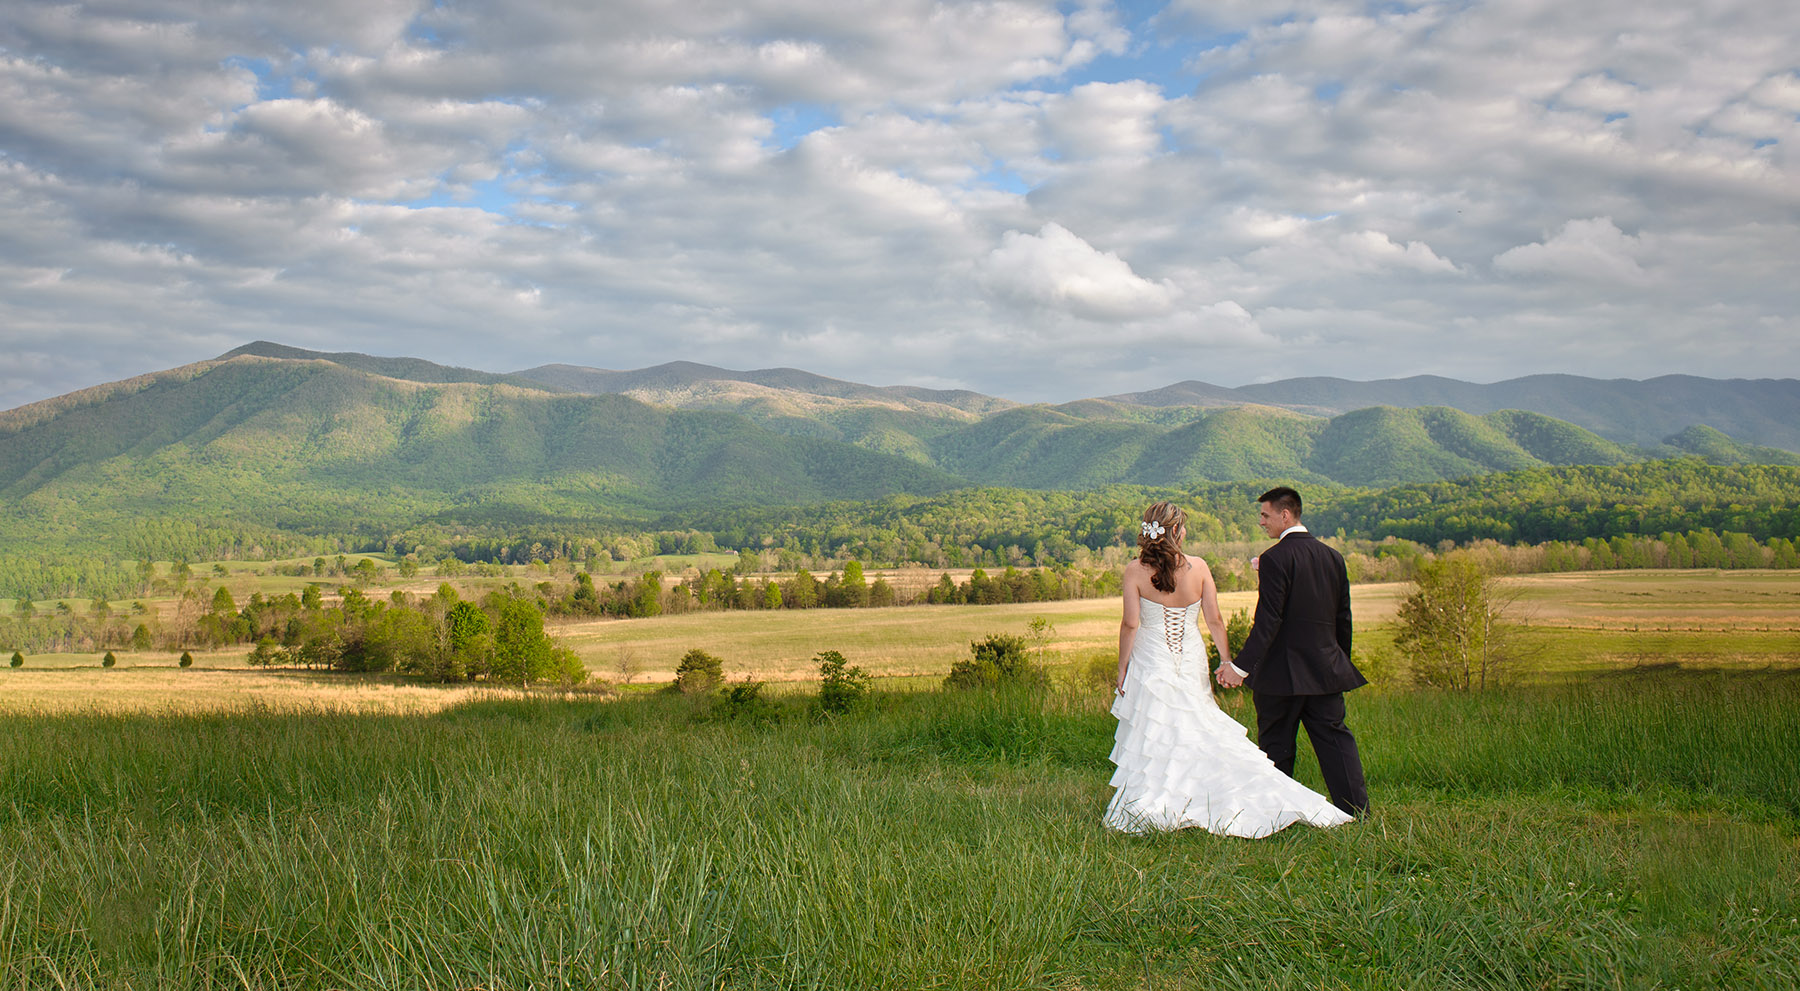 Cades Cove overlook all inclusive elopement packages